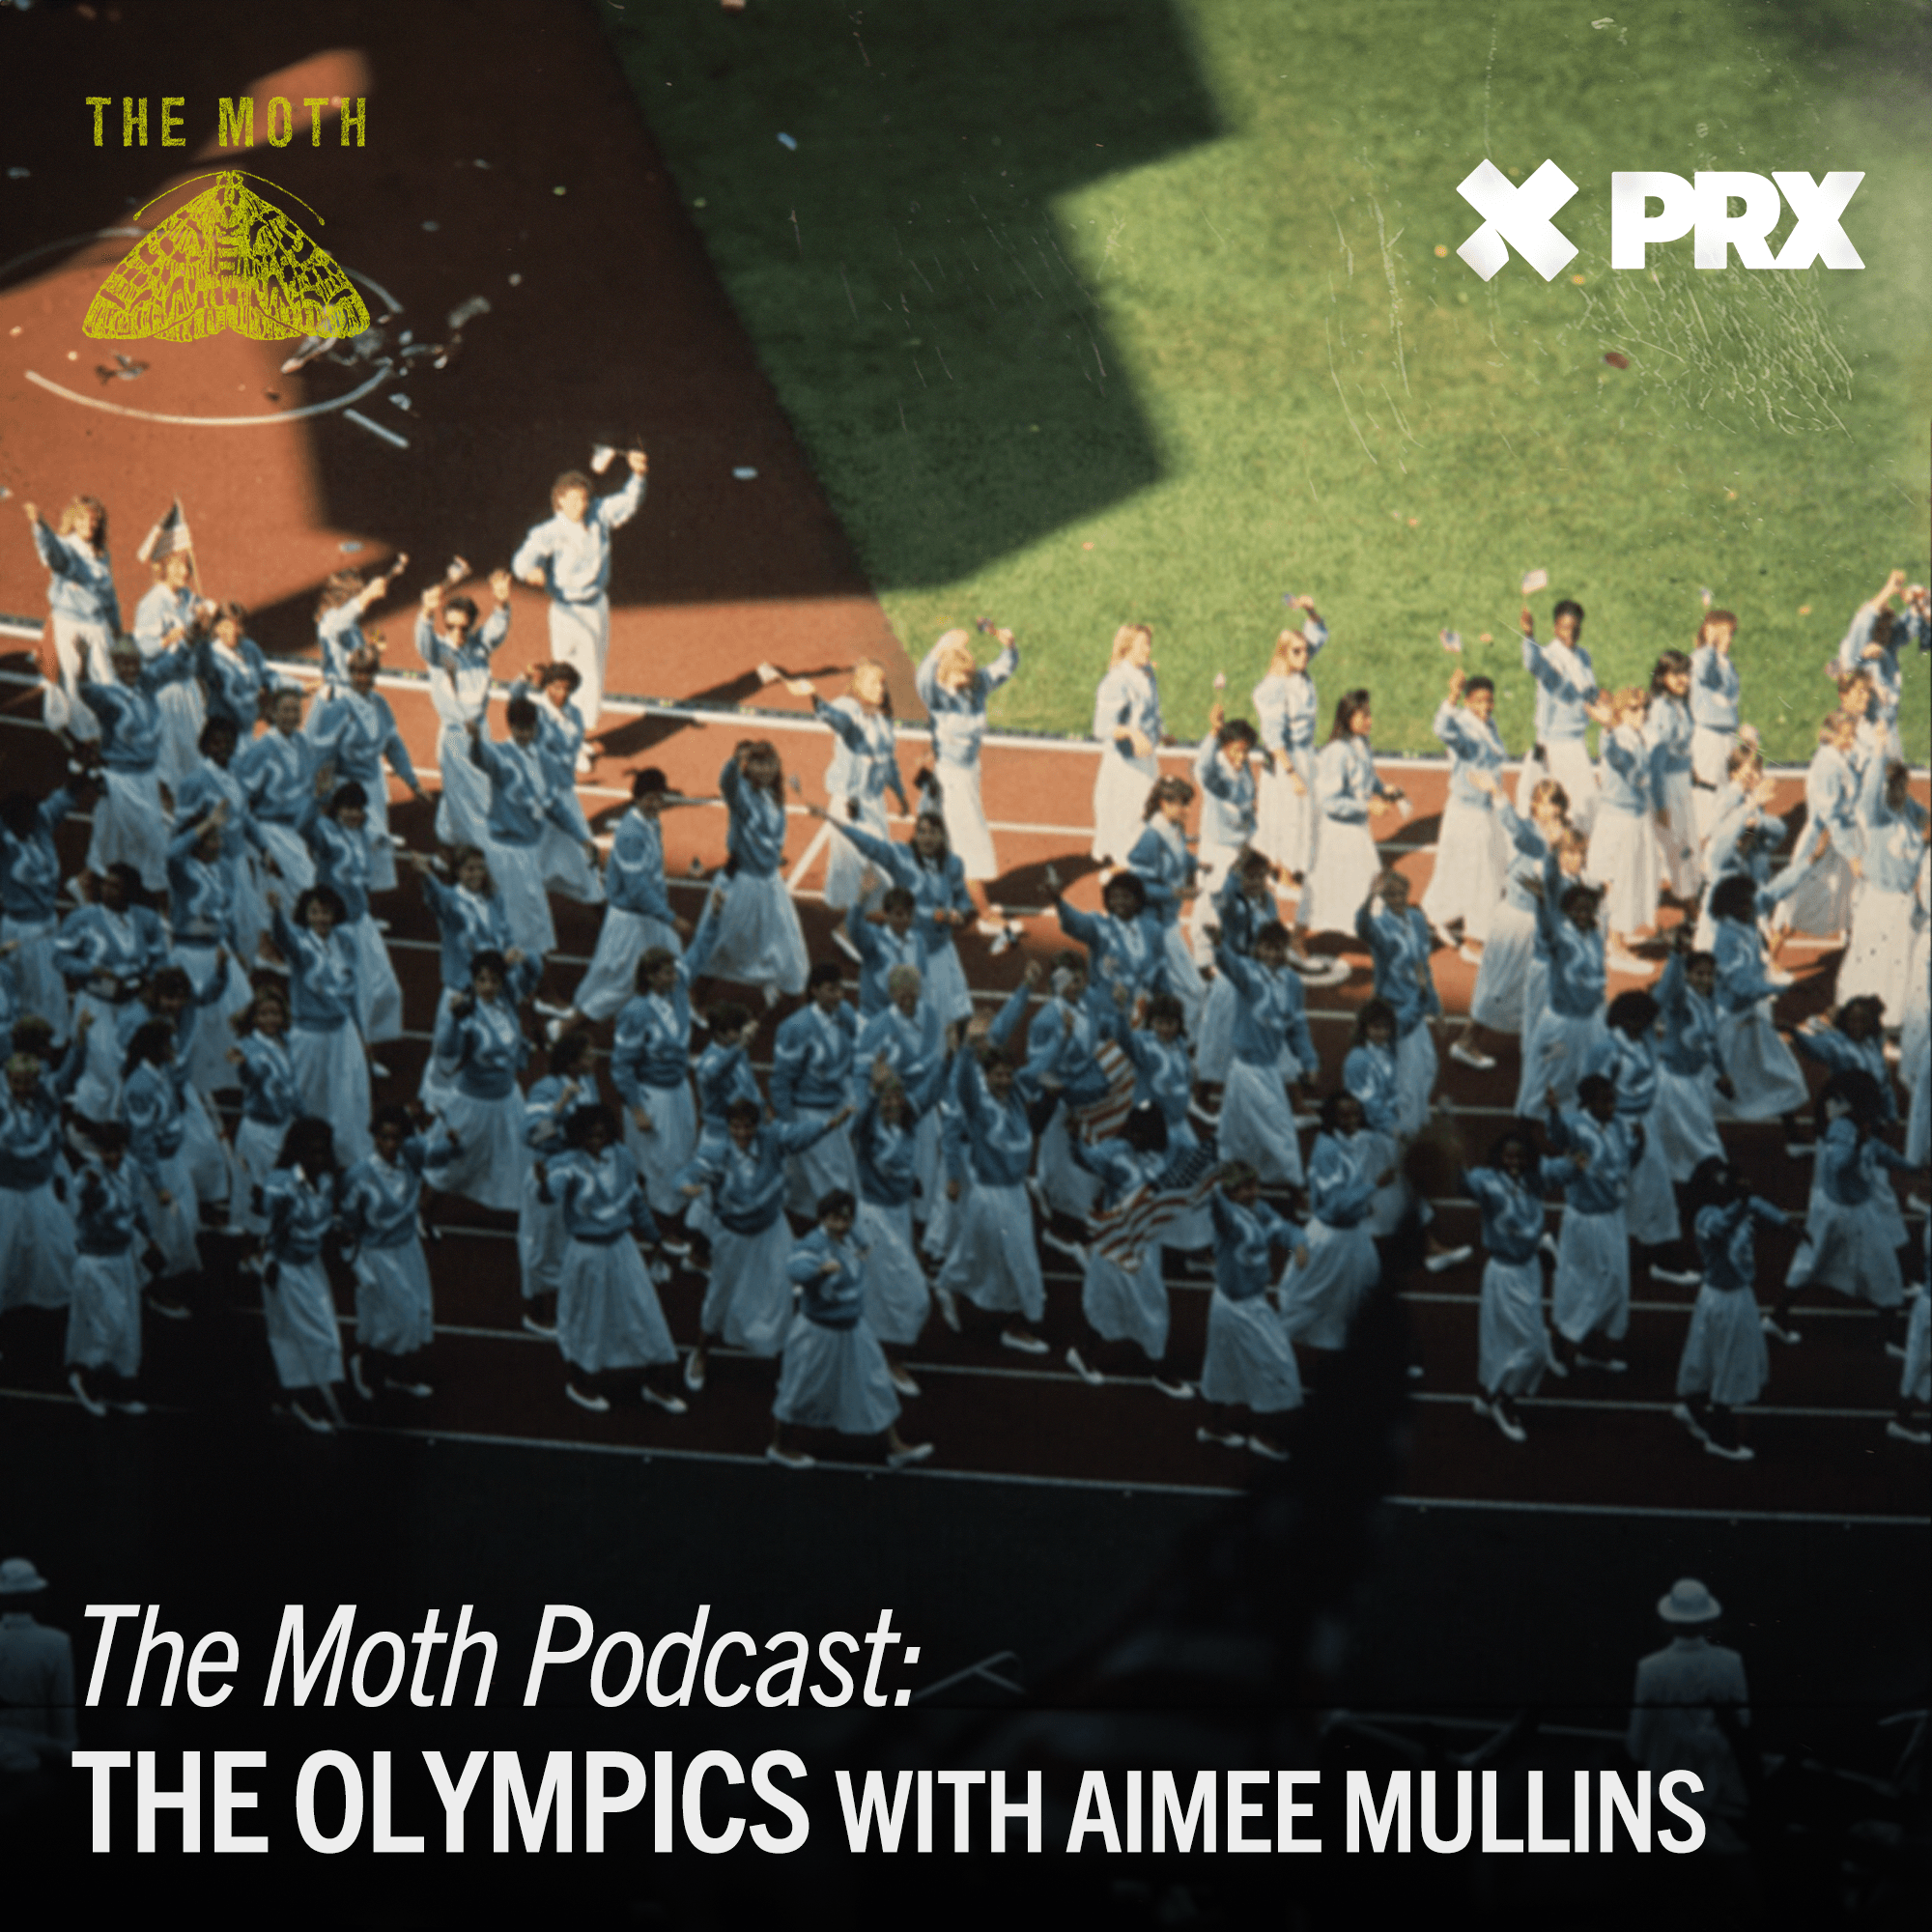 Thumbnail for "The Moth Podcast: The Olympics with Aimee Mullins".